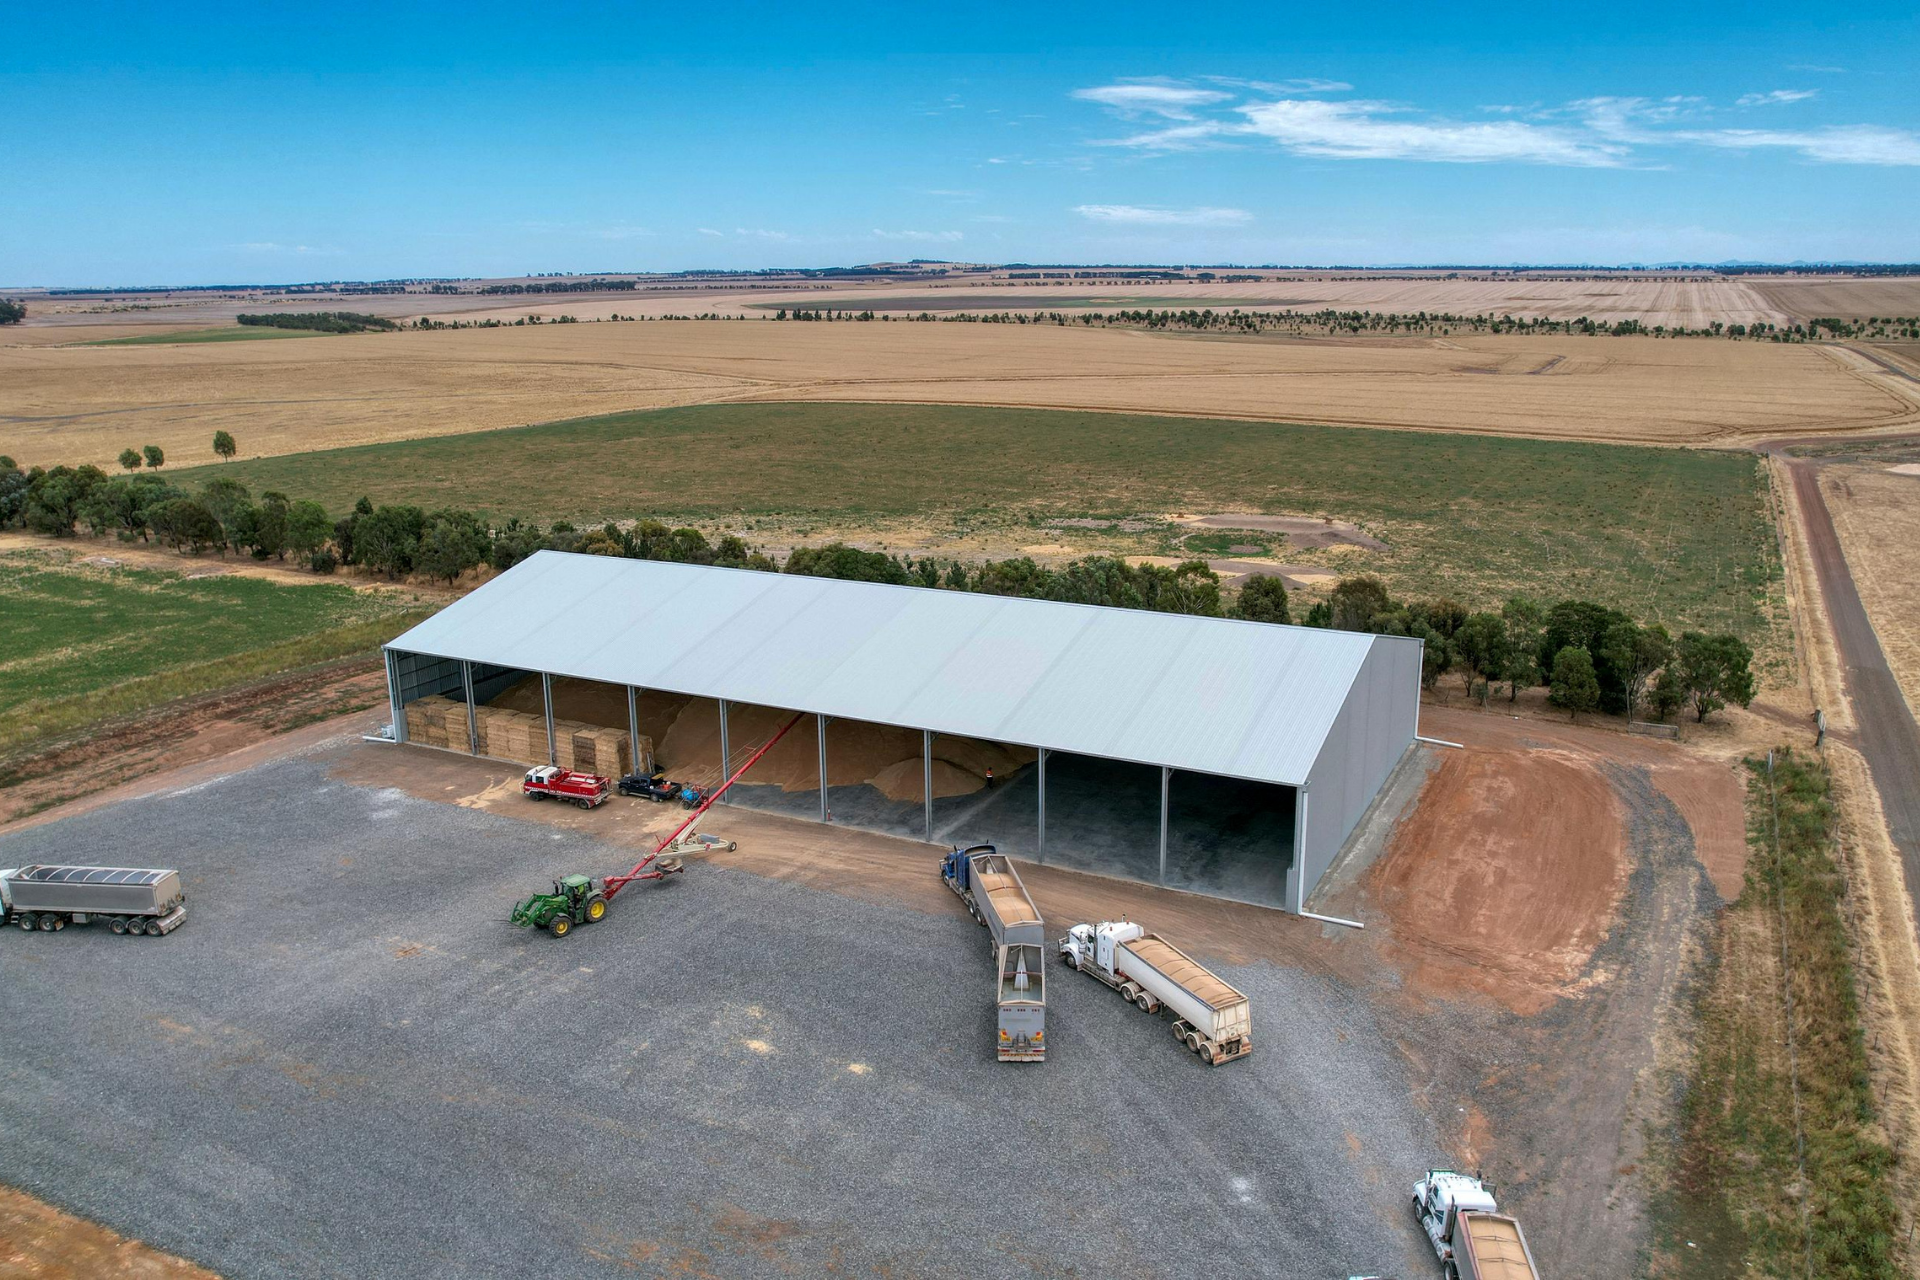 You are currently viewing 81m x 40m x 9m grain storage shed